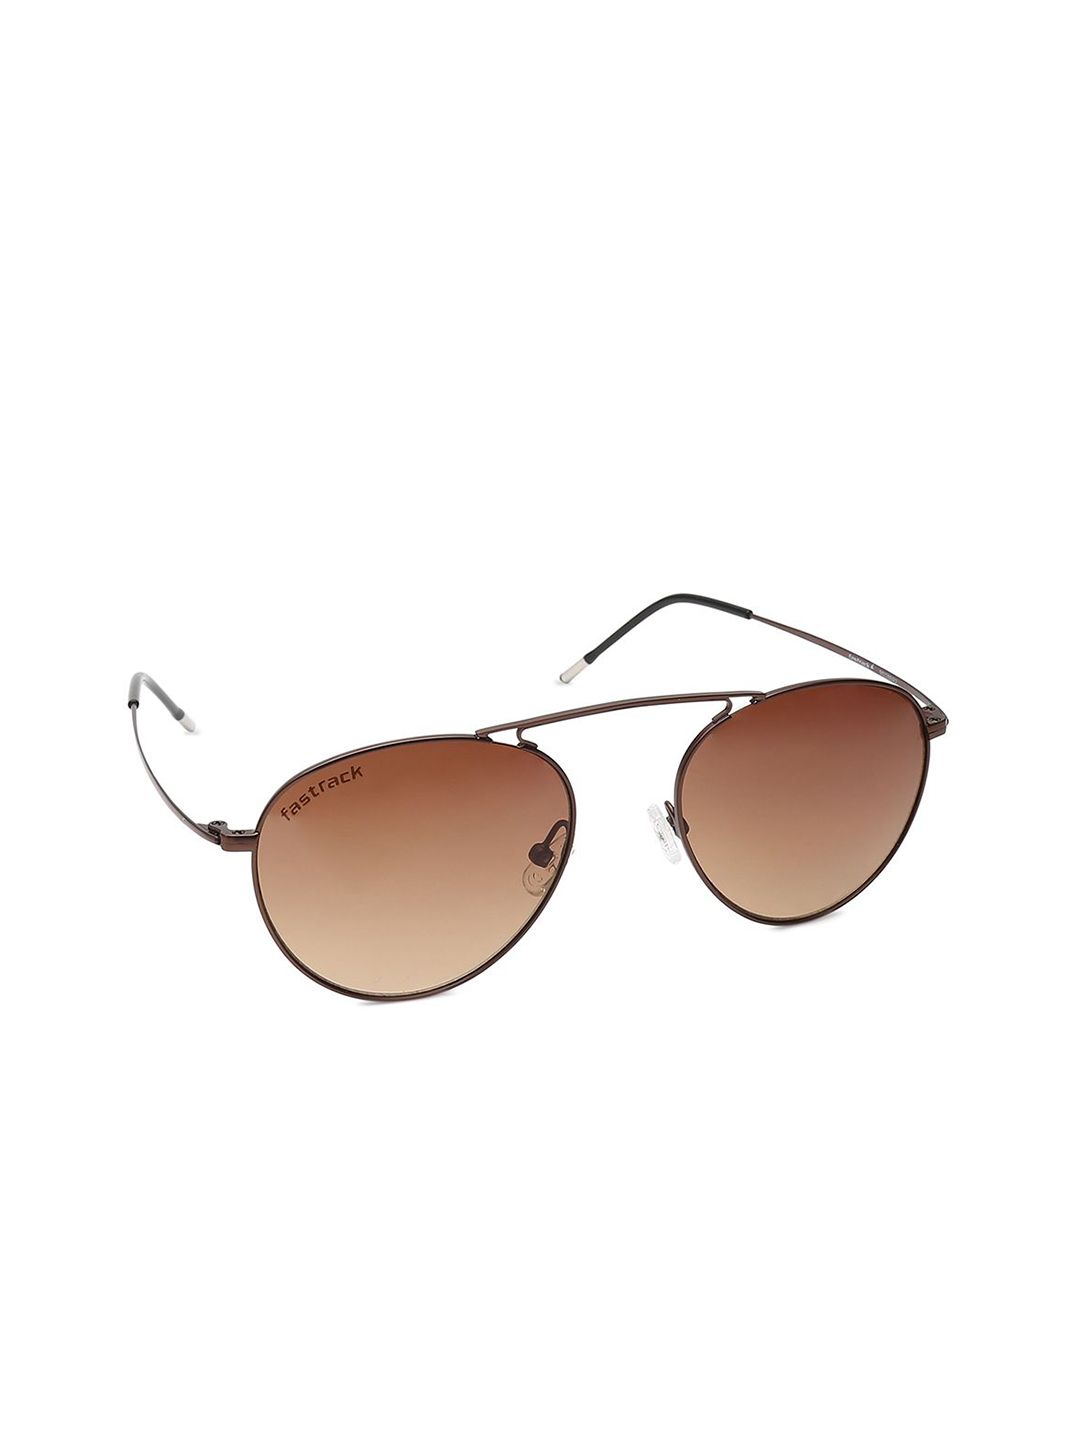 Fastrack Unisex Brown Lens & Brown Aviator Sunglasses with UV Protected Lens Price in India